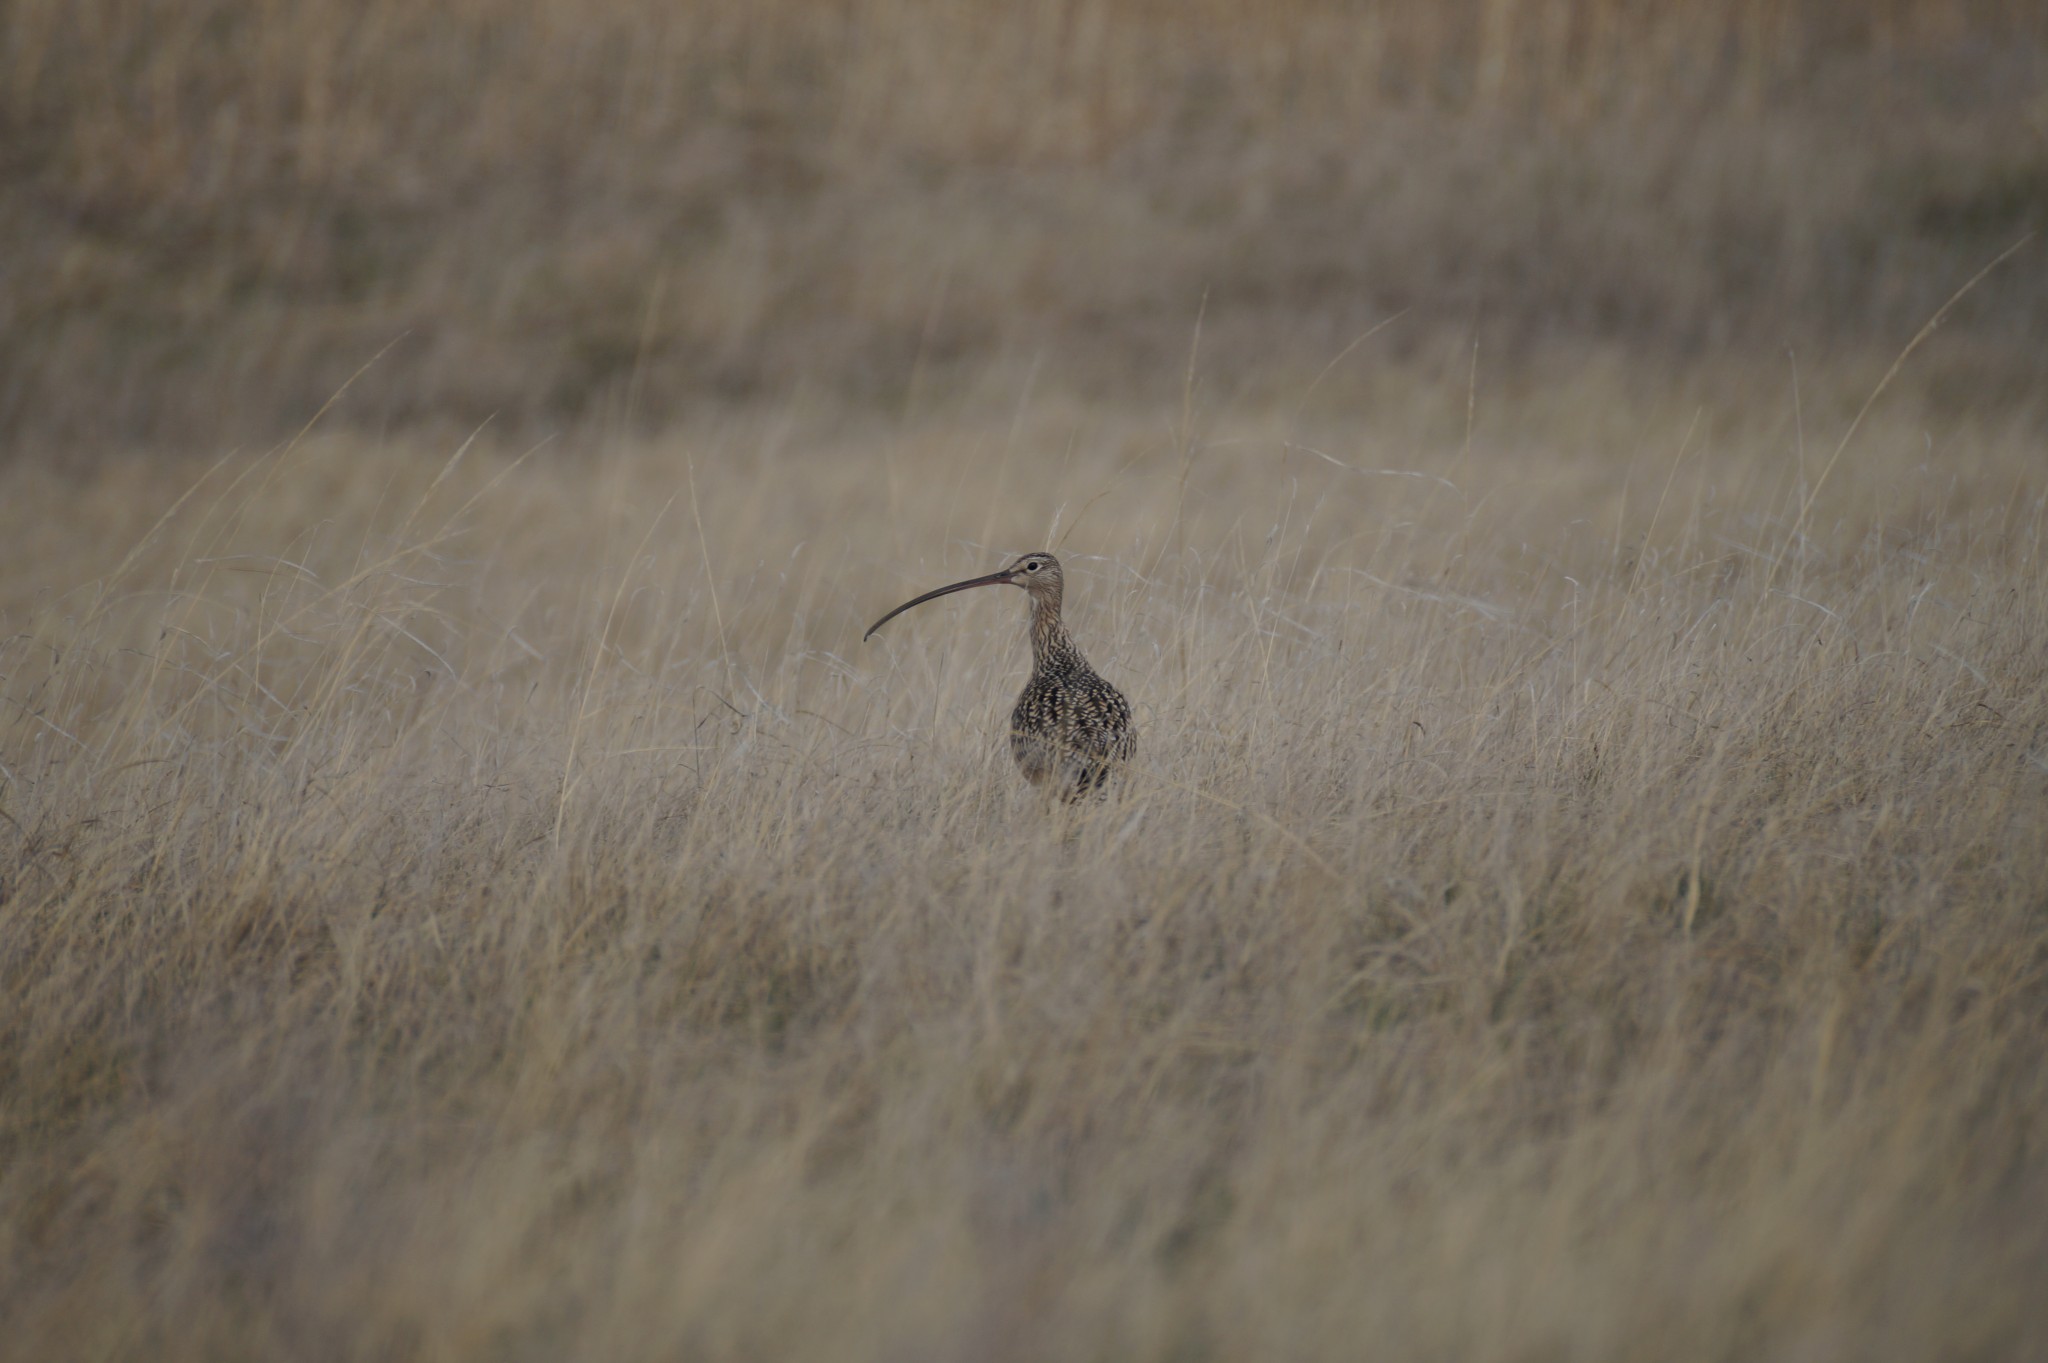 One of my favorite birds, the Long-billed Curlew.